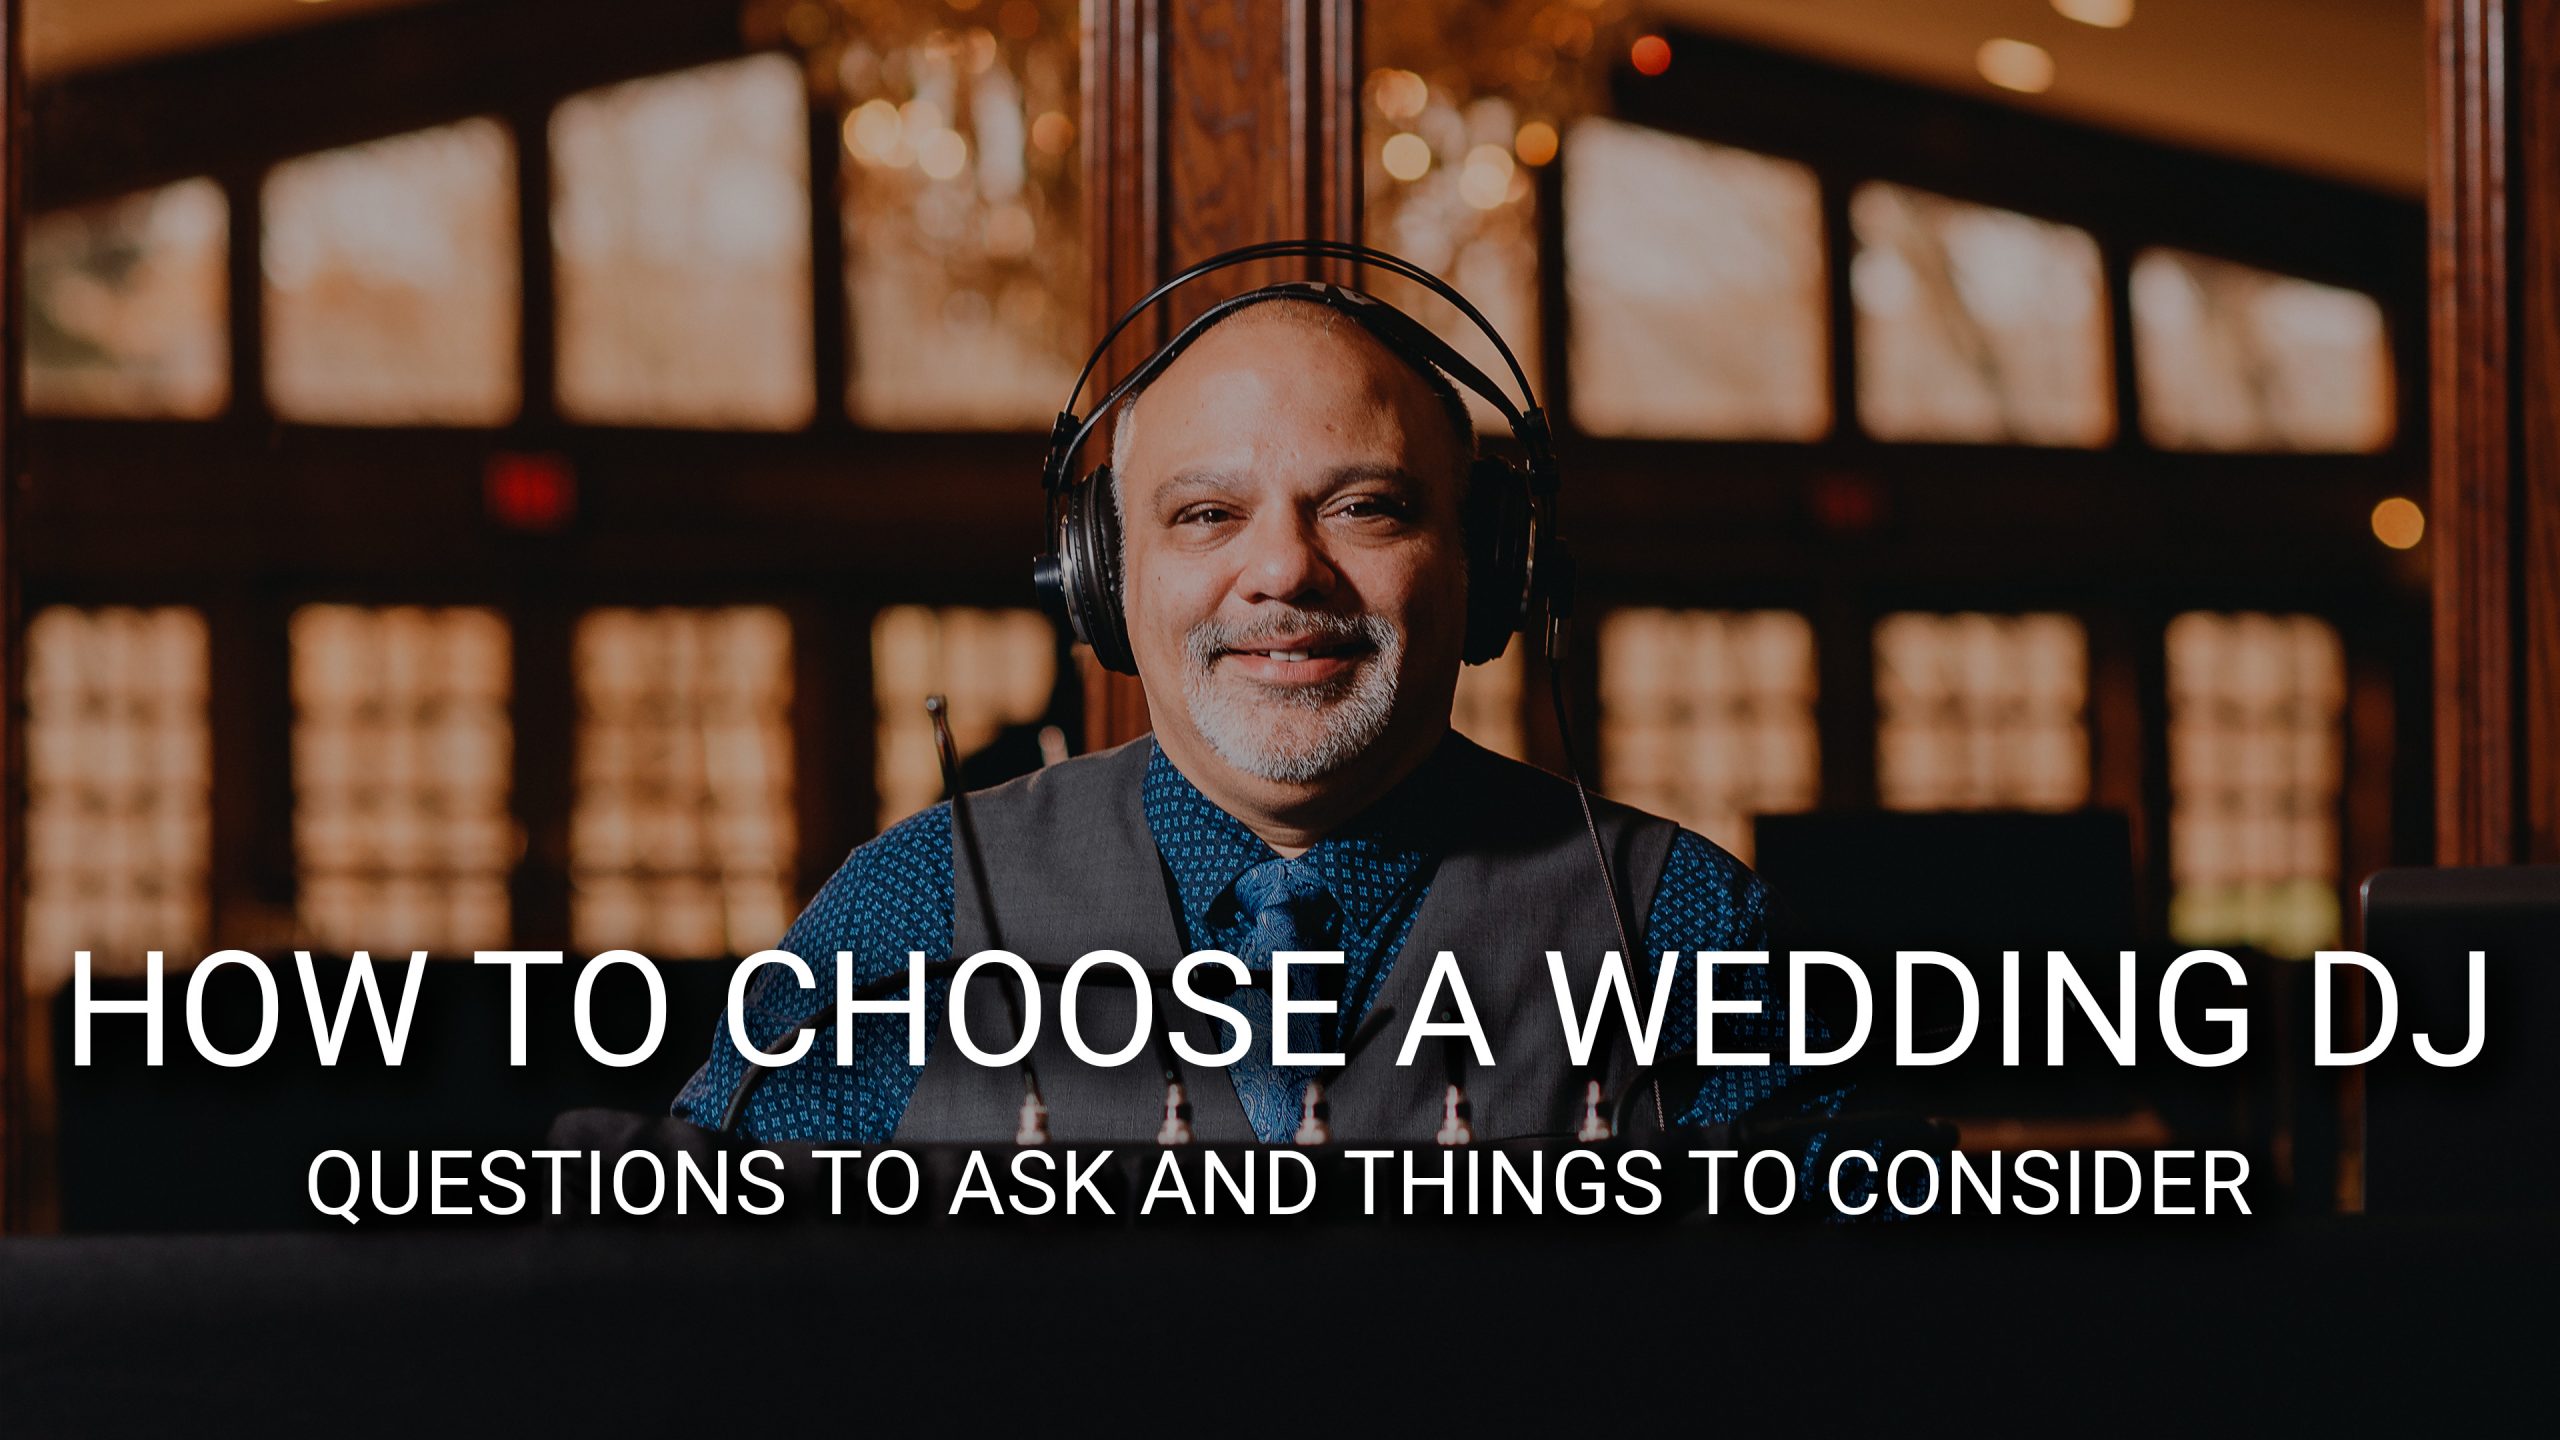 Image of a wedding DJ promo'ing a YouTube video on how to choose a wedding DJ.